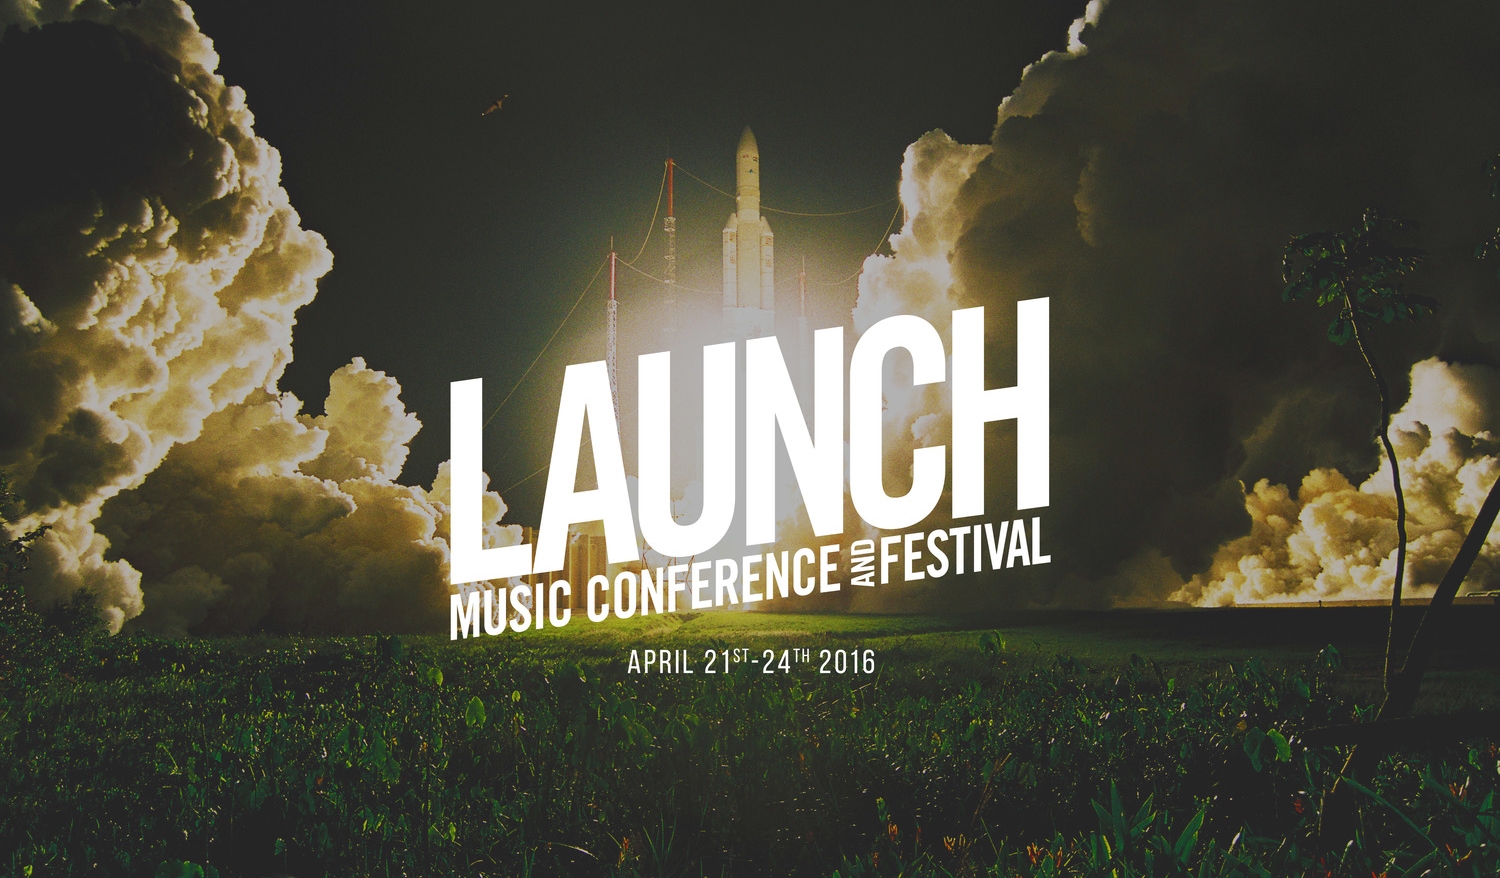 LAUNCH Music Conference & Festival Chicago Music